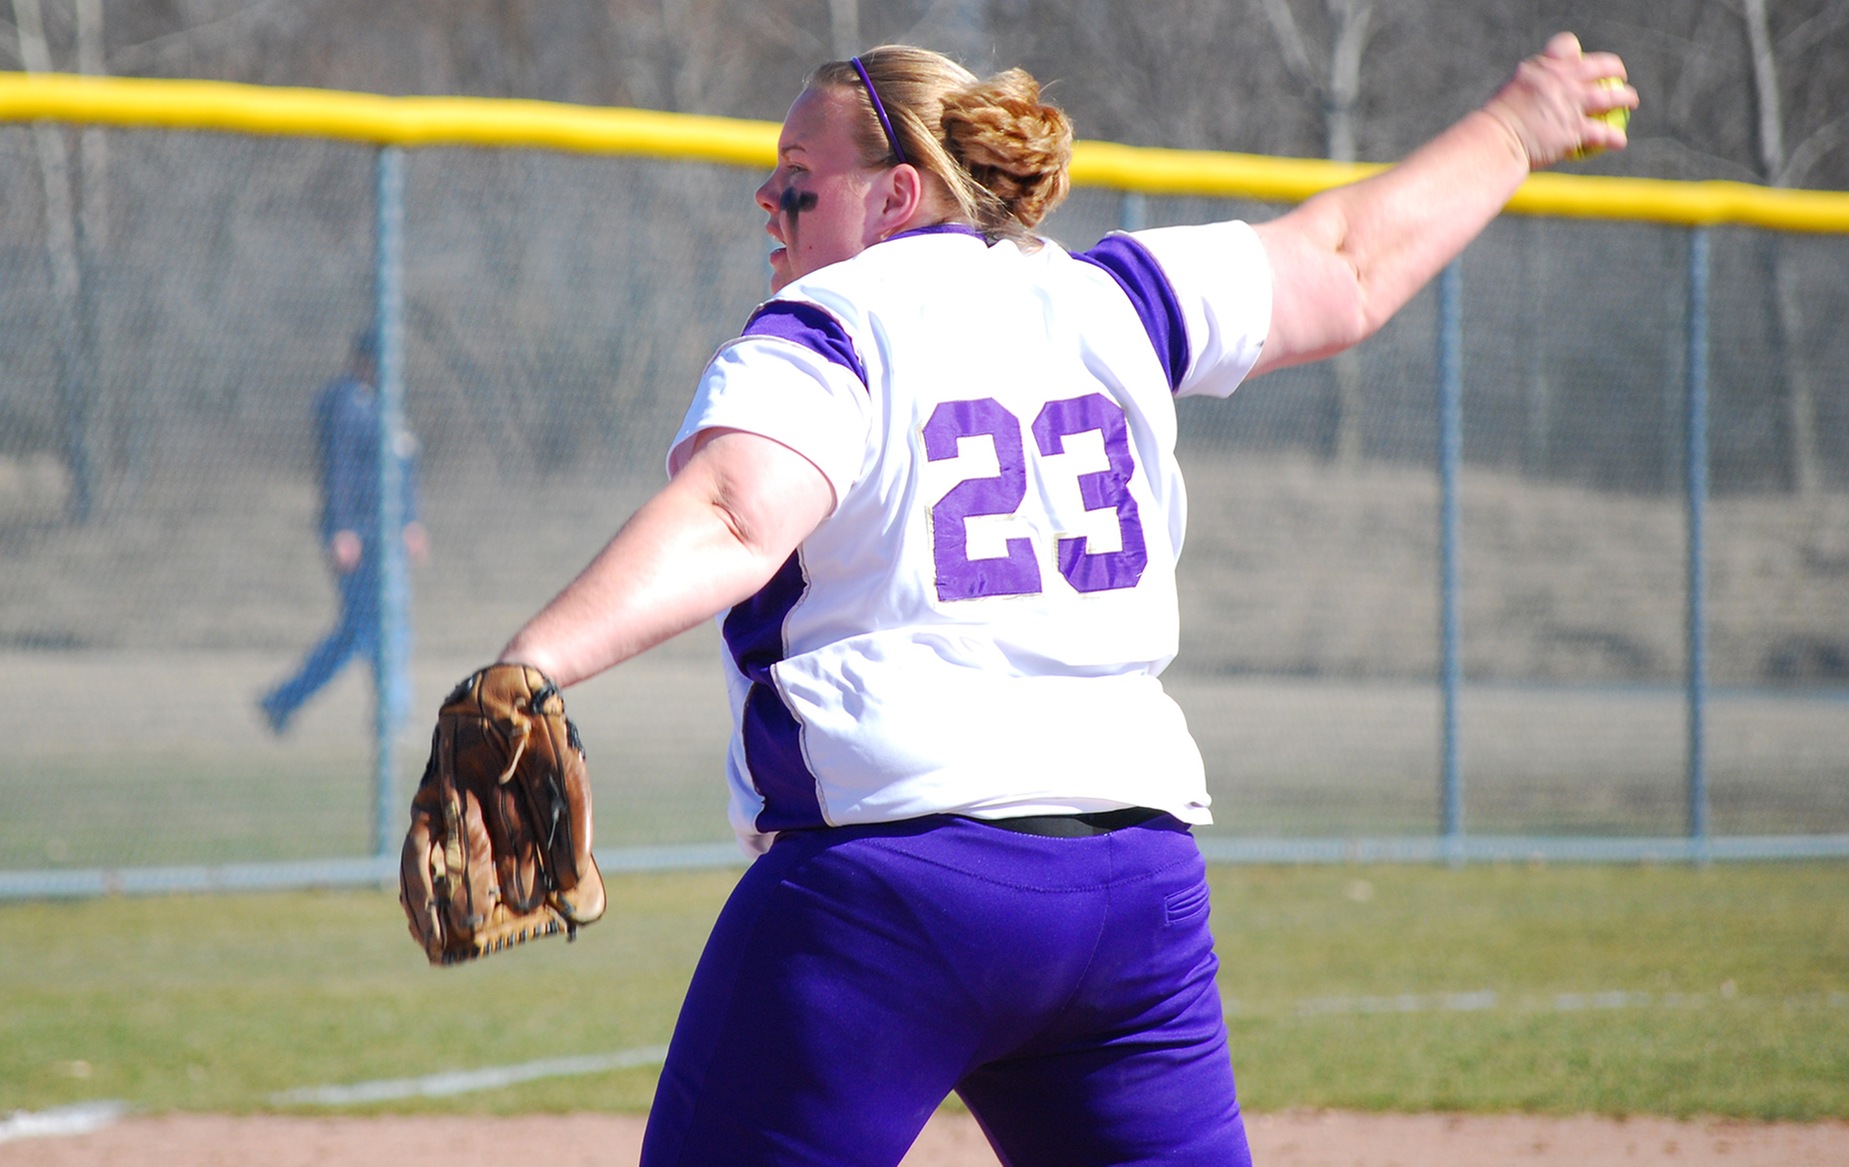 Schnipke Tabbed as HCAC Pitcher of the Week